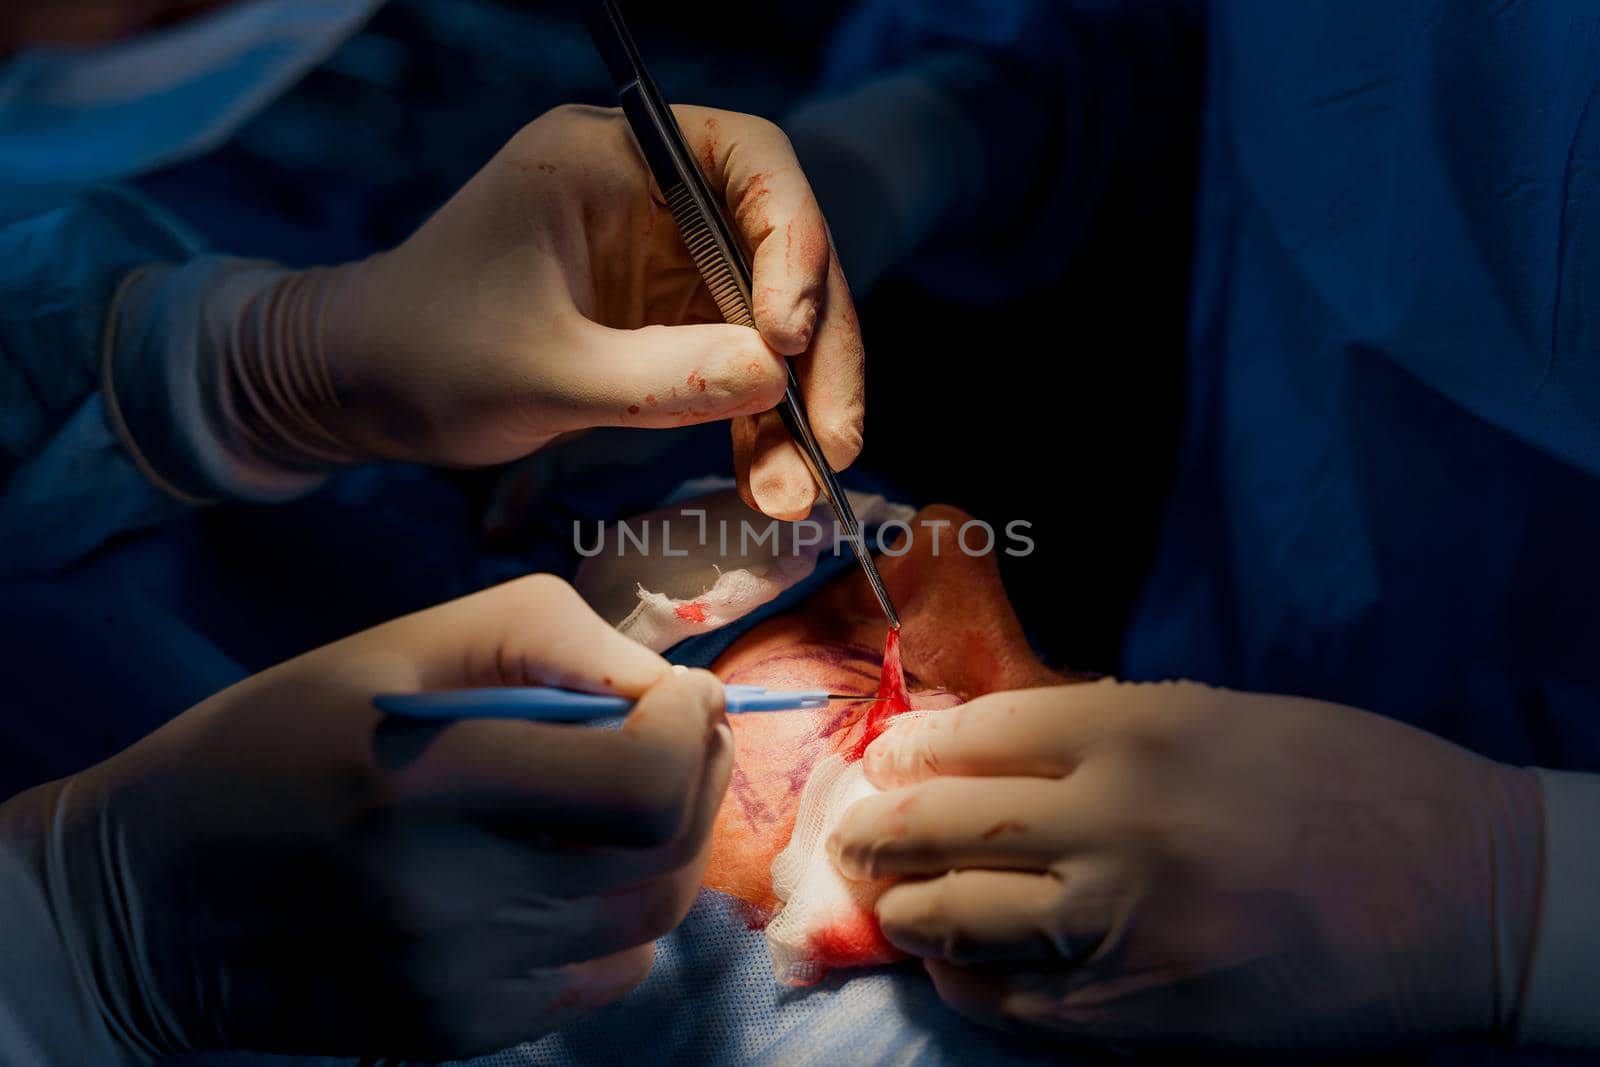 Close-up blepharoplasty lipofilling plastic surgery operation for modifying the eye region of the face in medical clinic